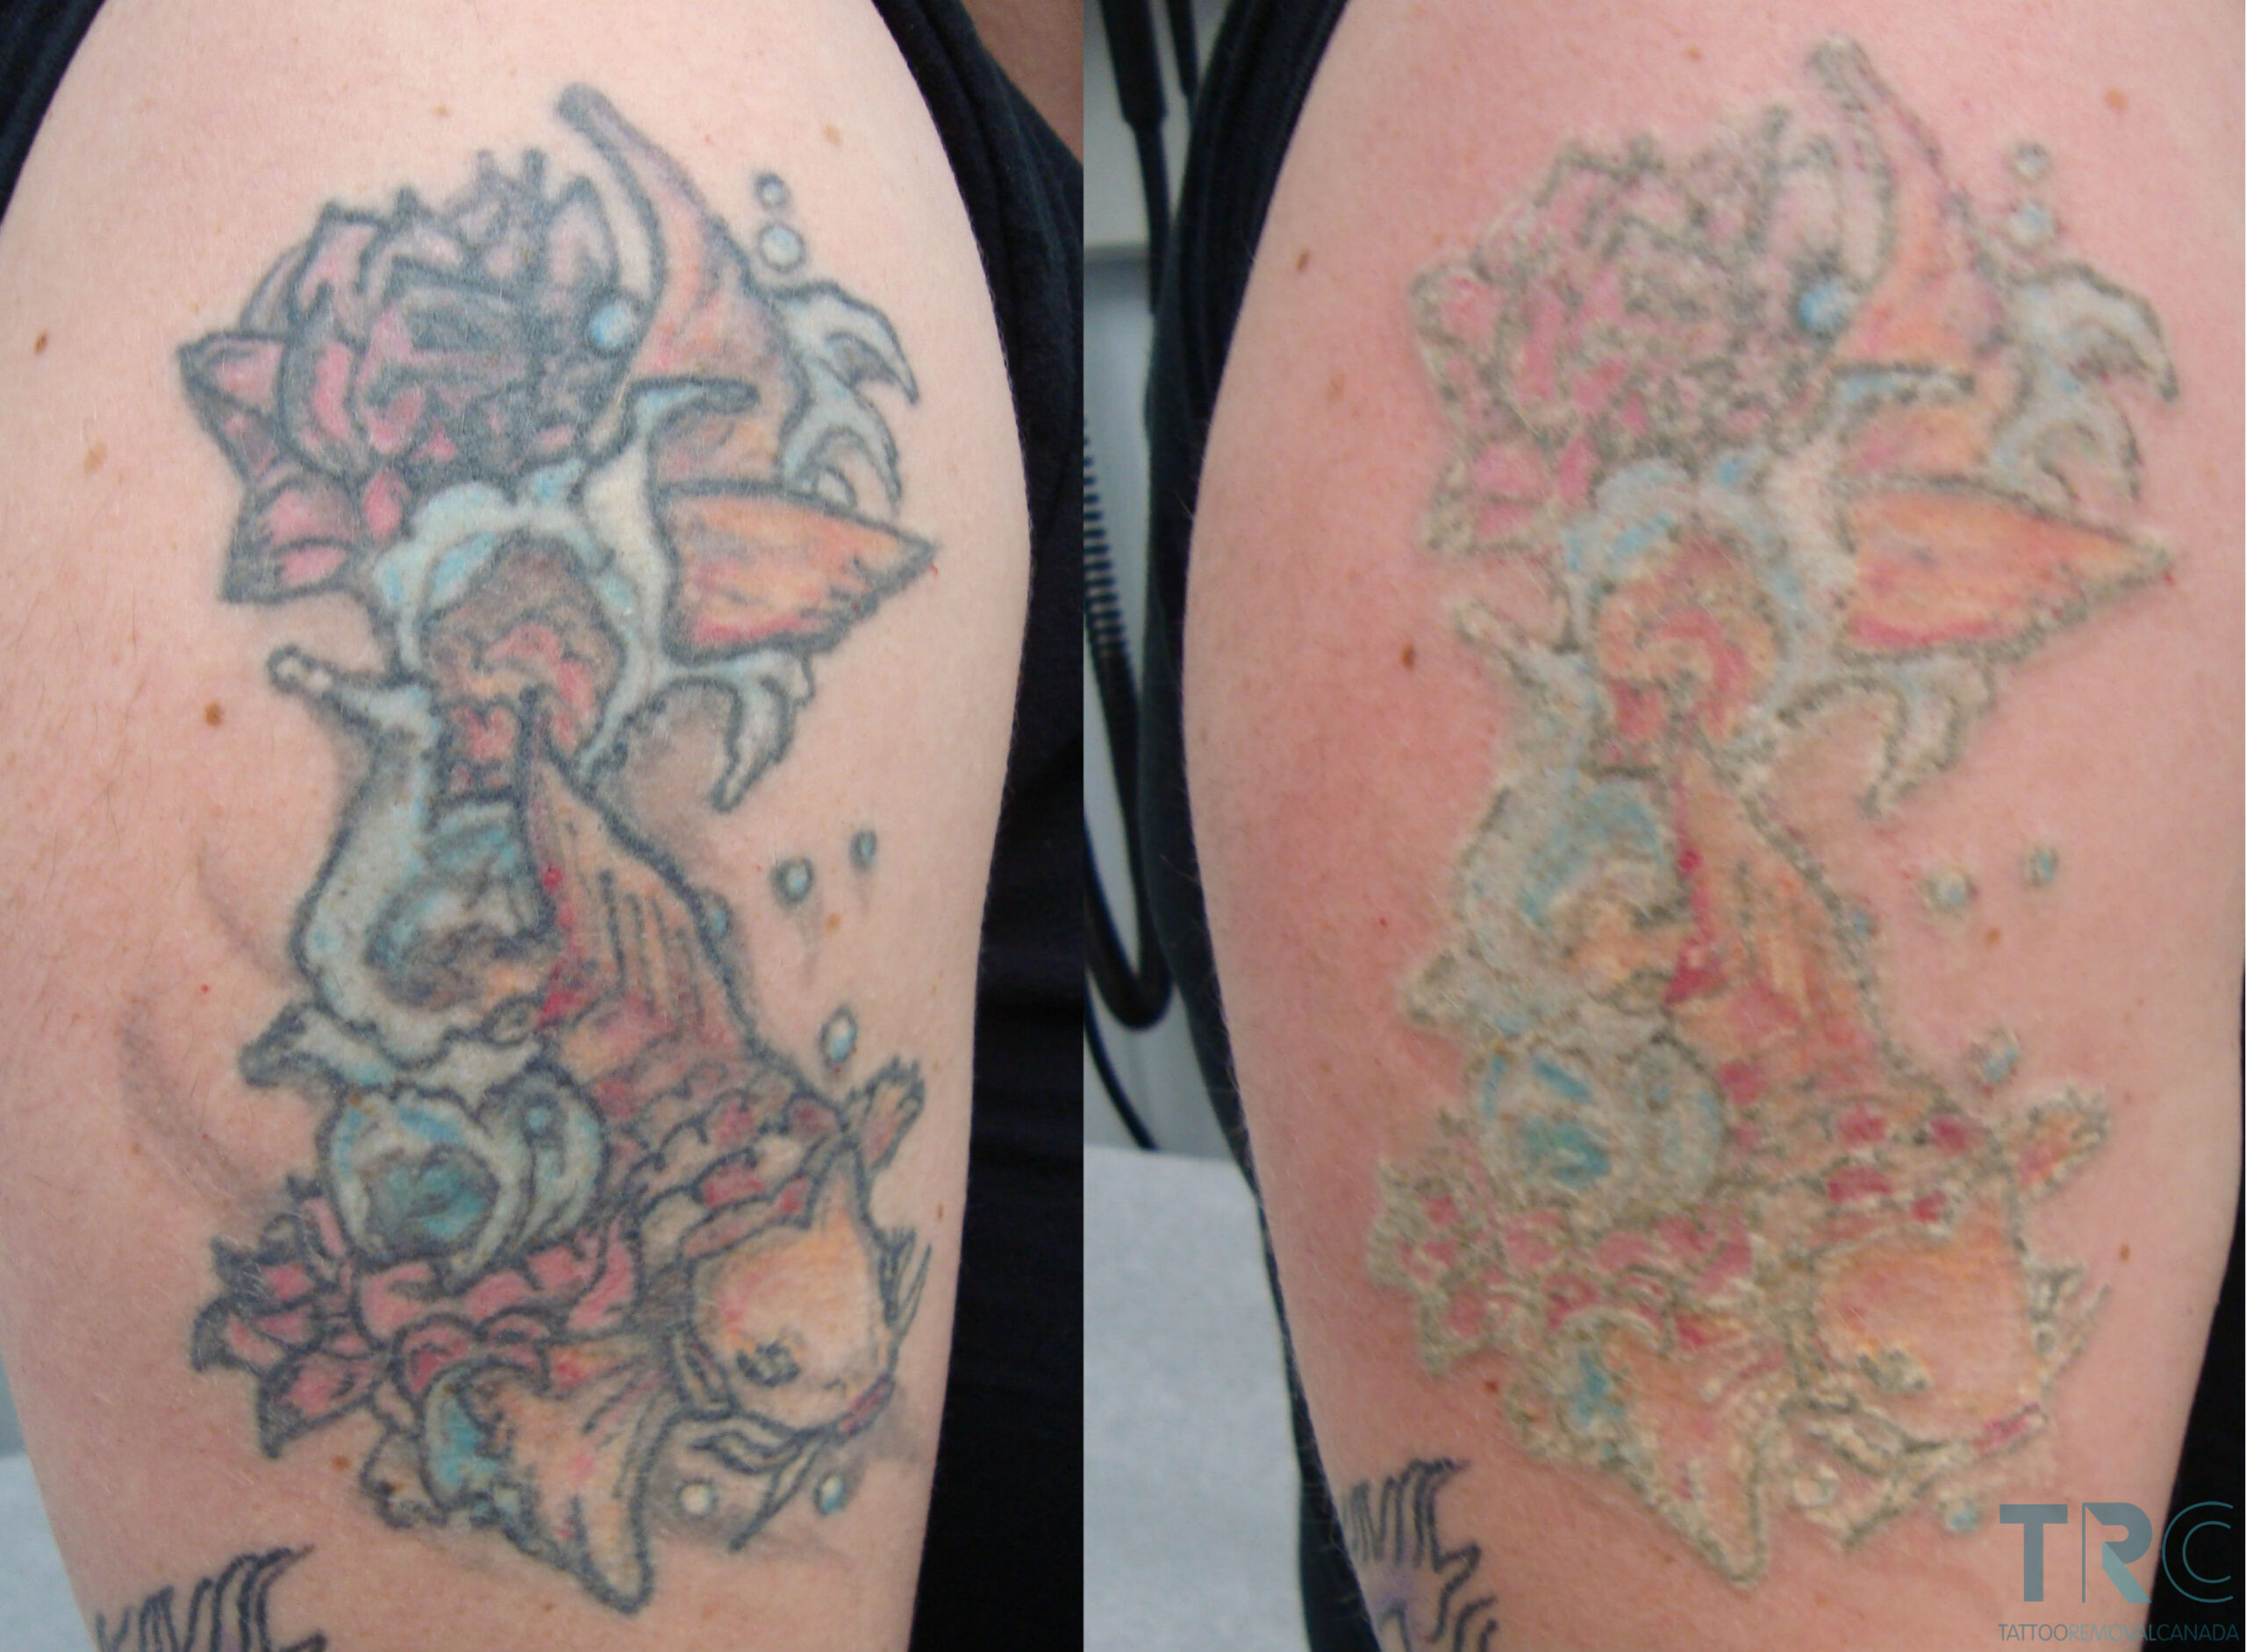 What tattoo colors fade